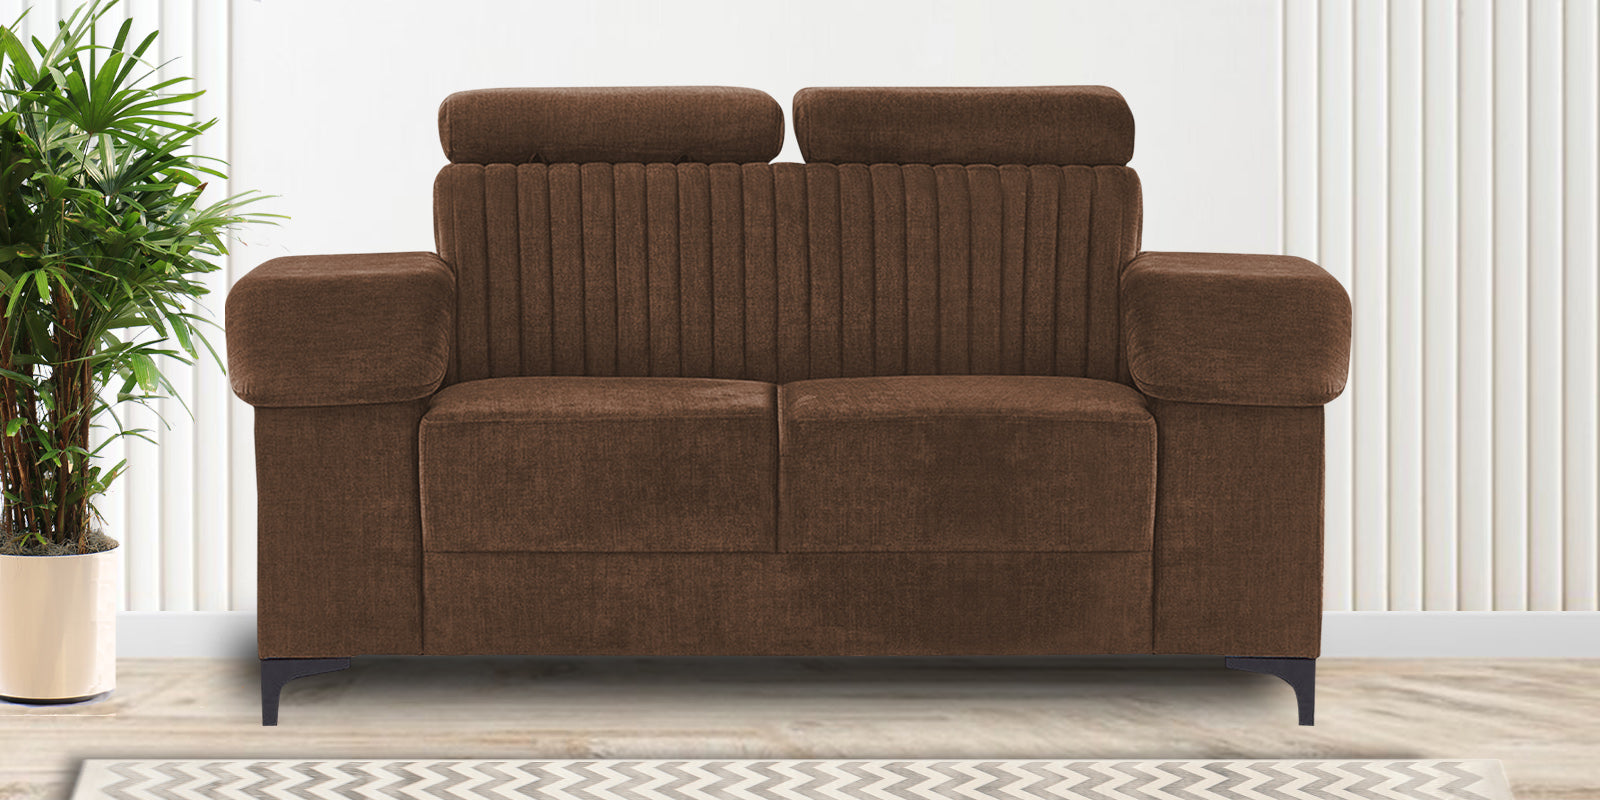 Draco Fabric 2 Seater Sofa in Chestnut Brown Colour